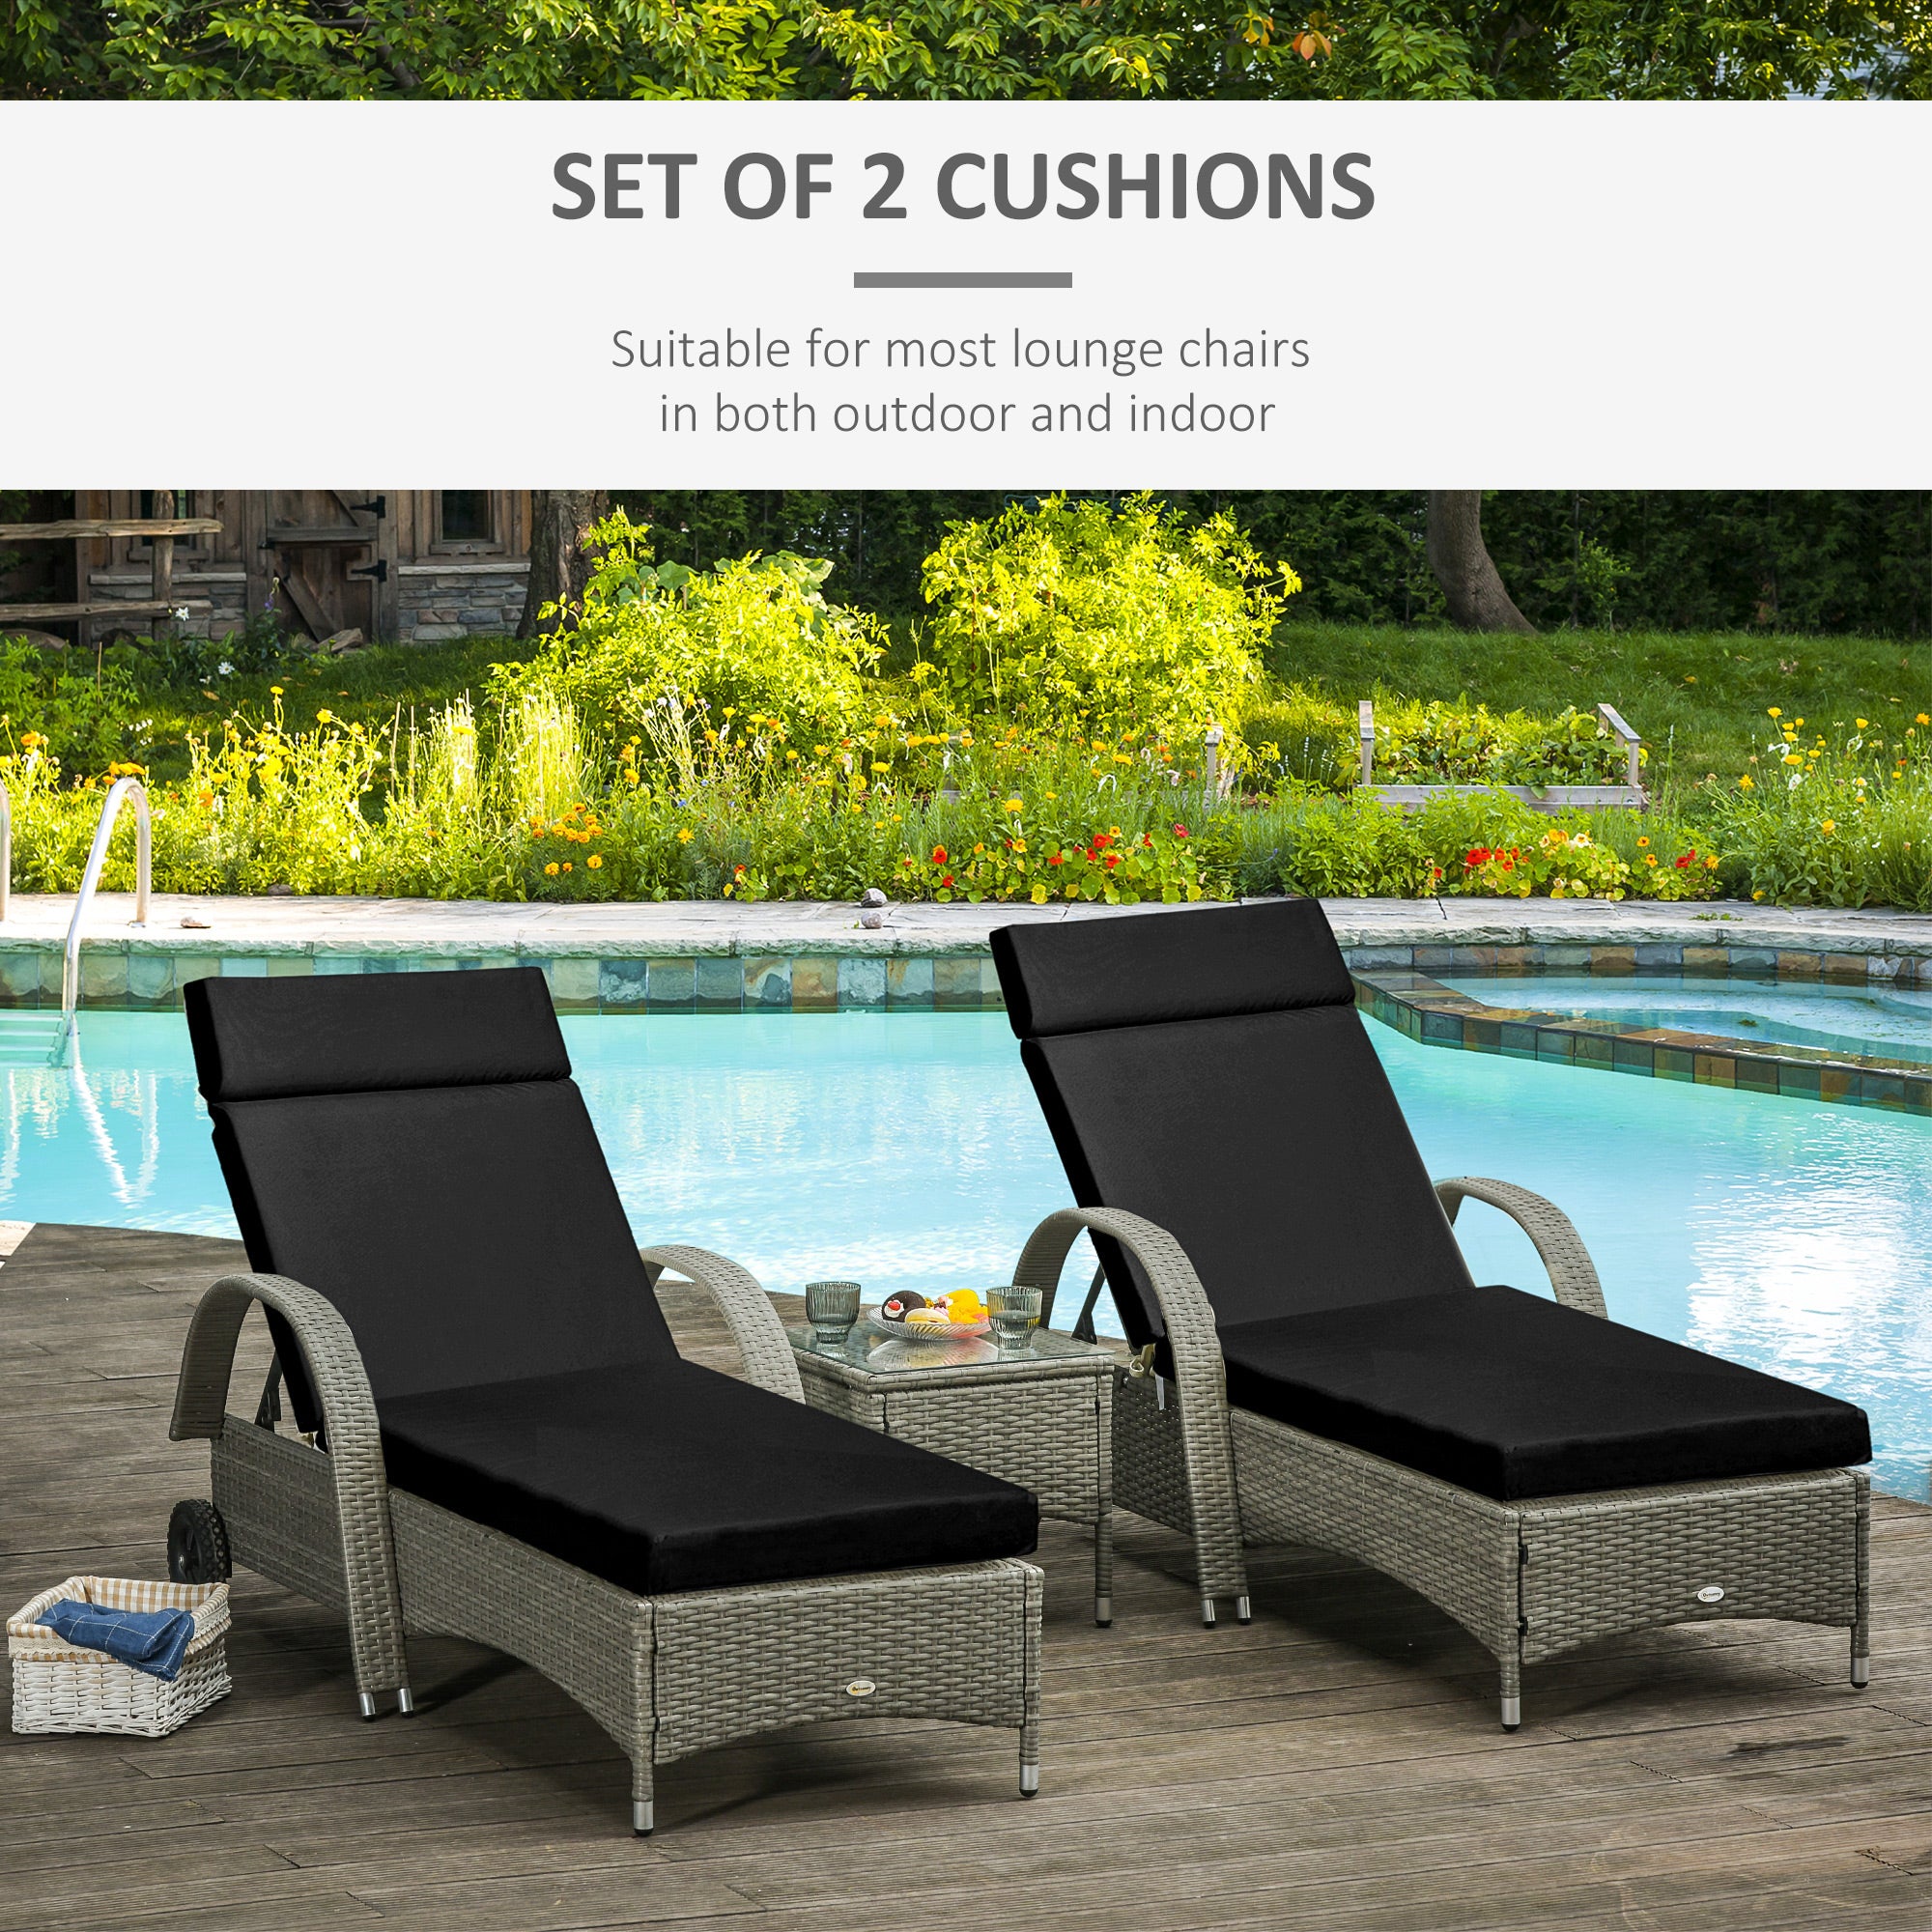 Outsunny Set of 2 Sun Lounger Cushions, Replacement Cushions for Rattan Furniture with Ties, 196 x 55 cm, Black